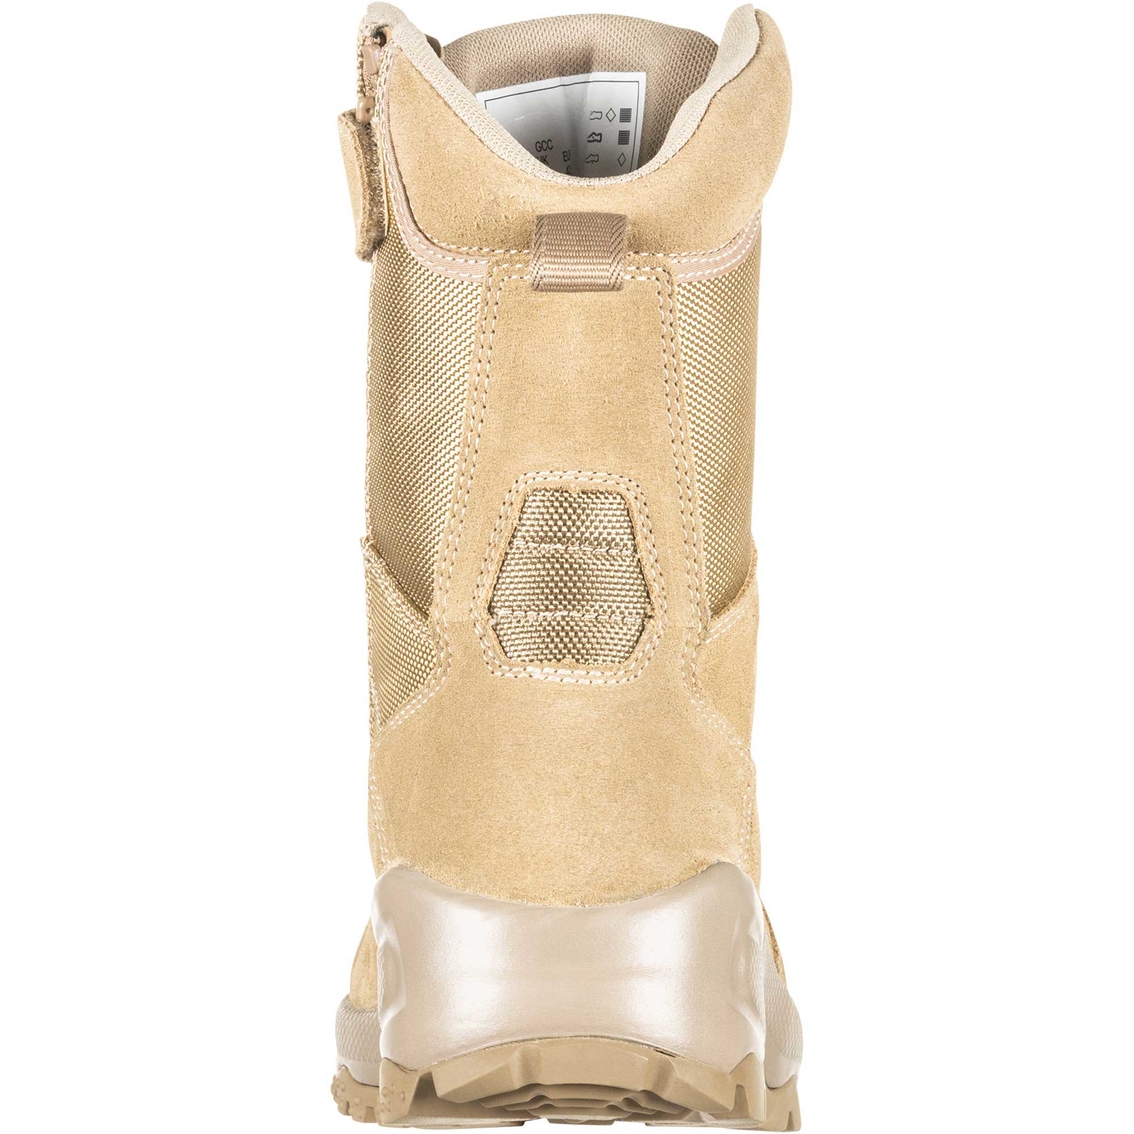 5.11 Men's A.T.A.C. 2.0 8 in. Arid Coyote Boots - Image 6 of 6